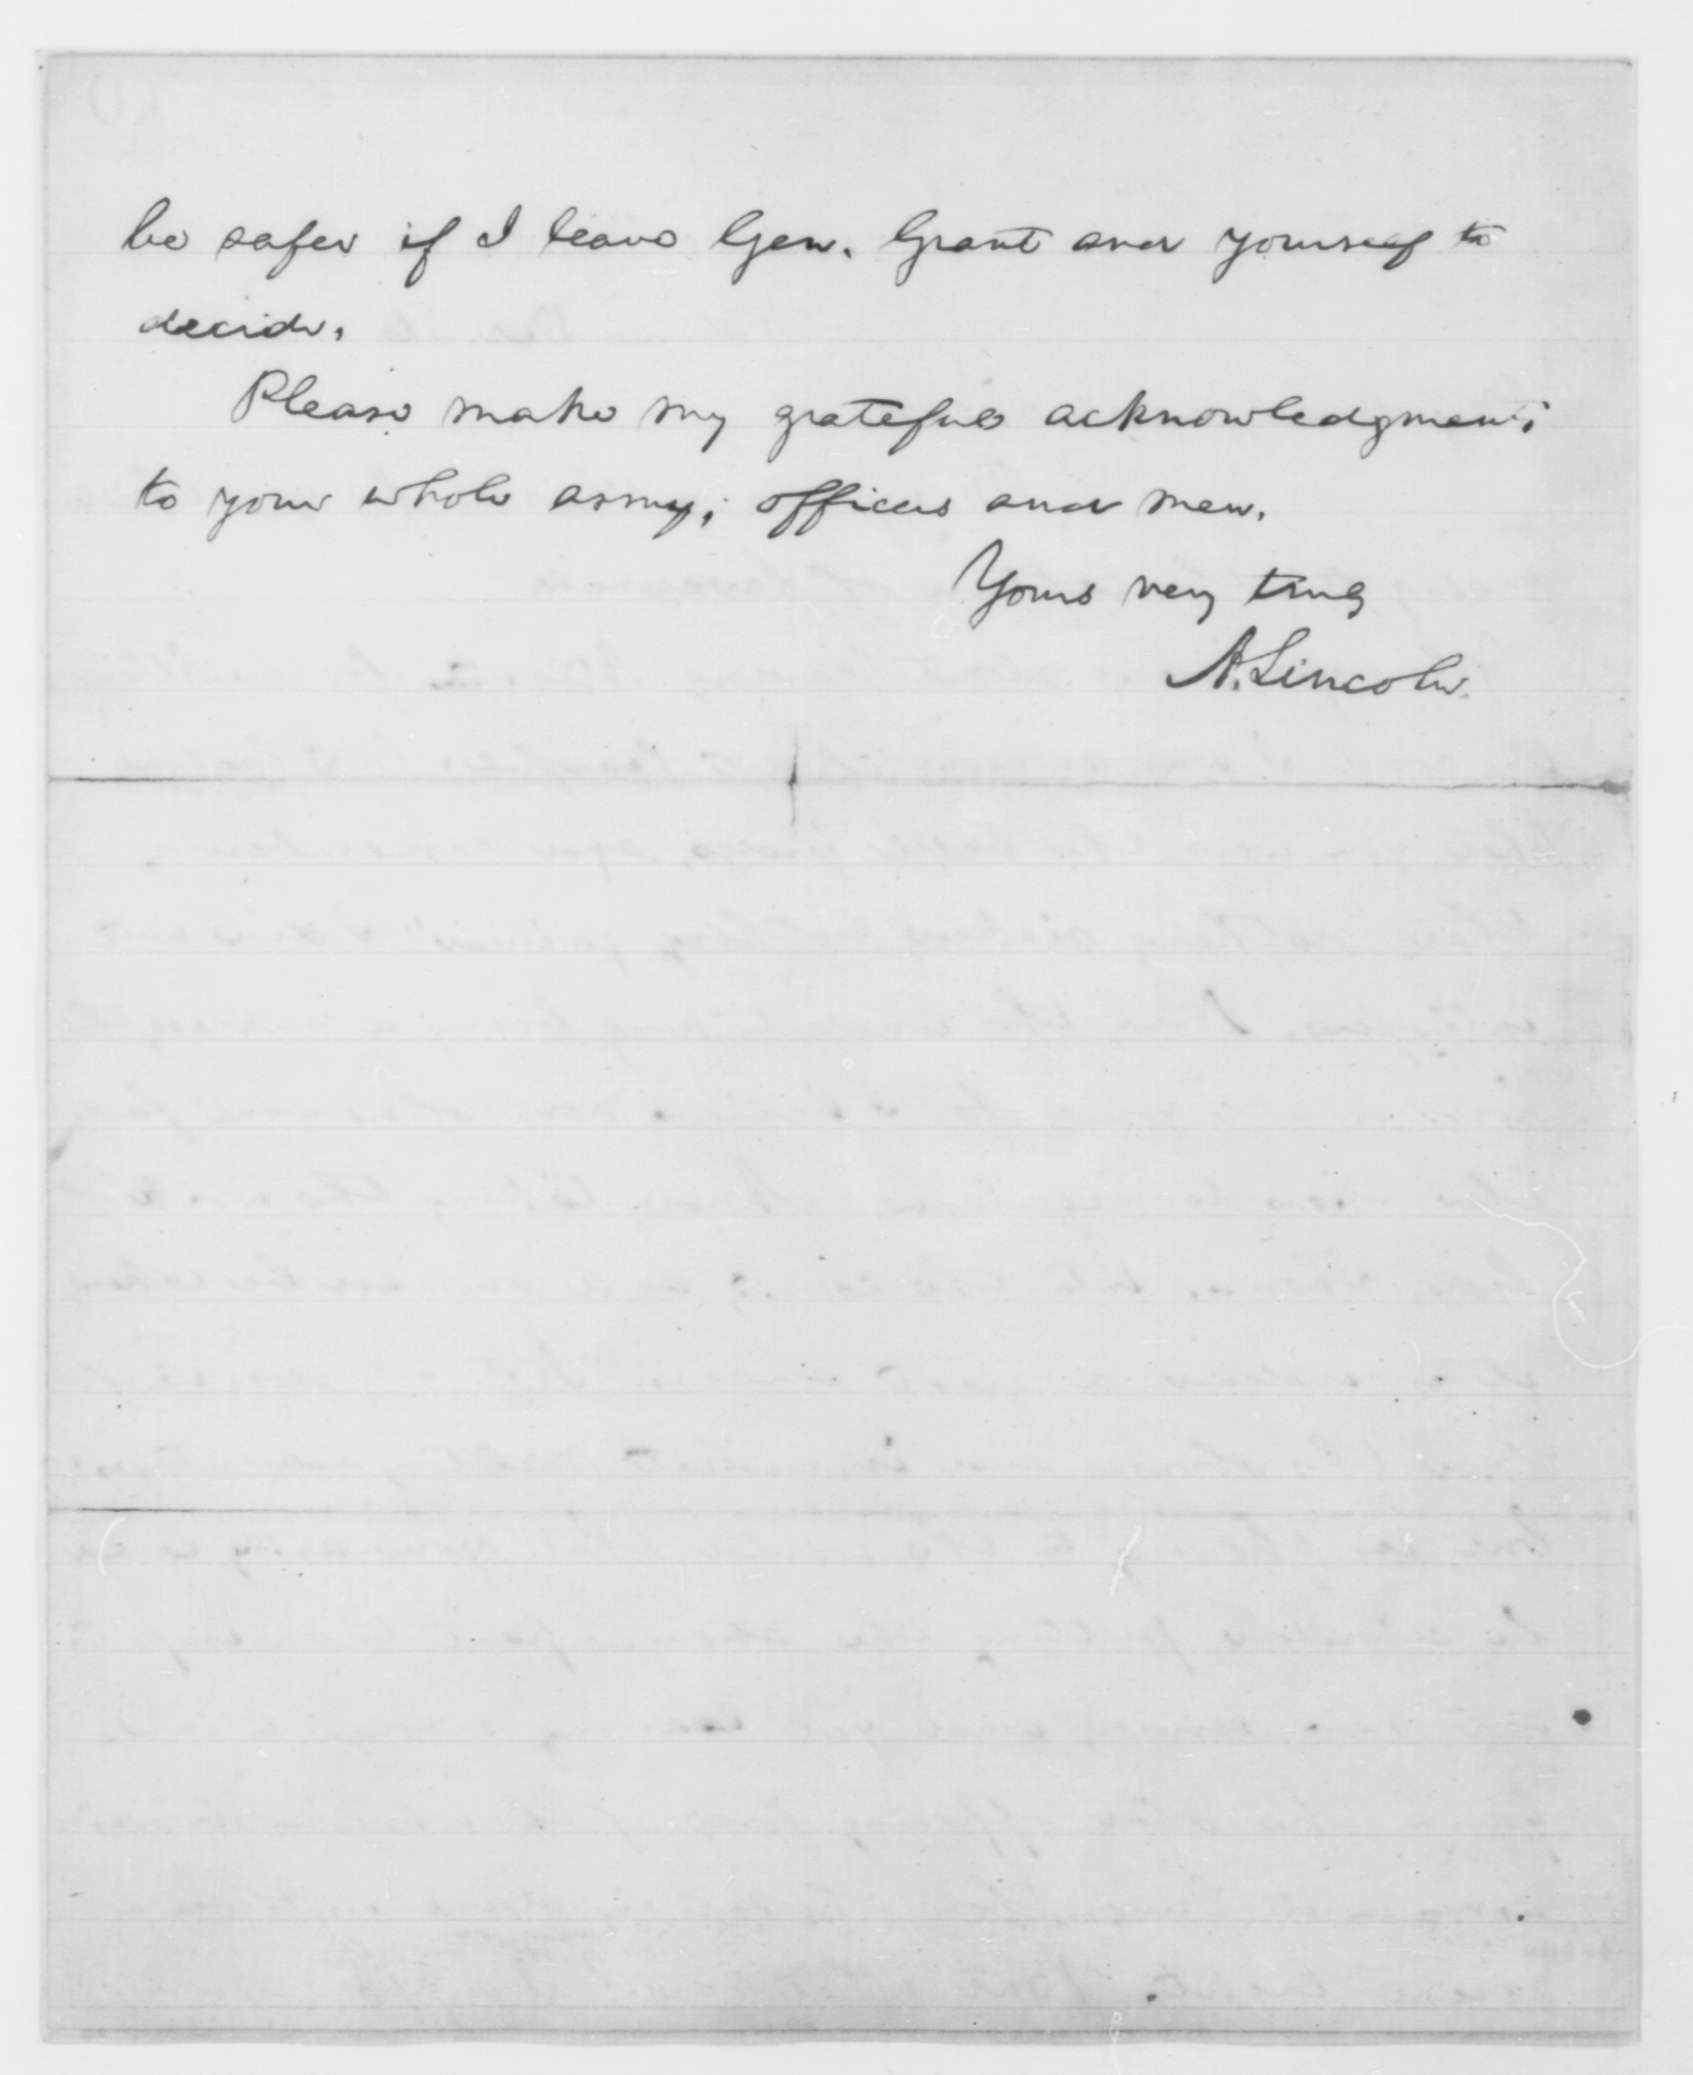 Abraham Lincoln's December 26th Letter Accepting His Gift